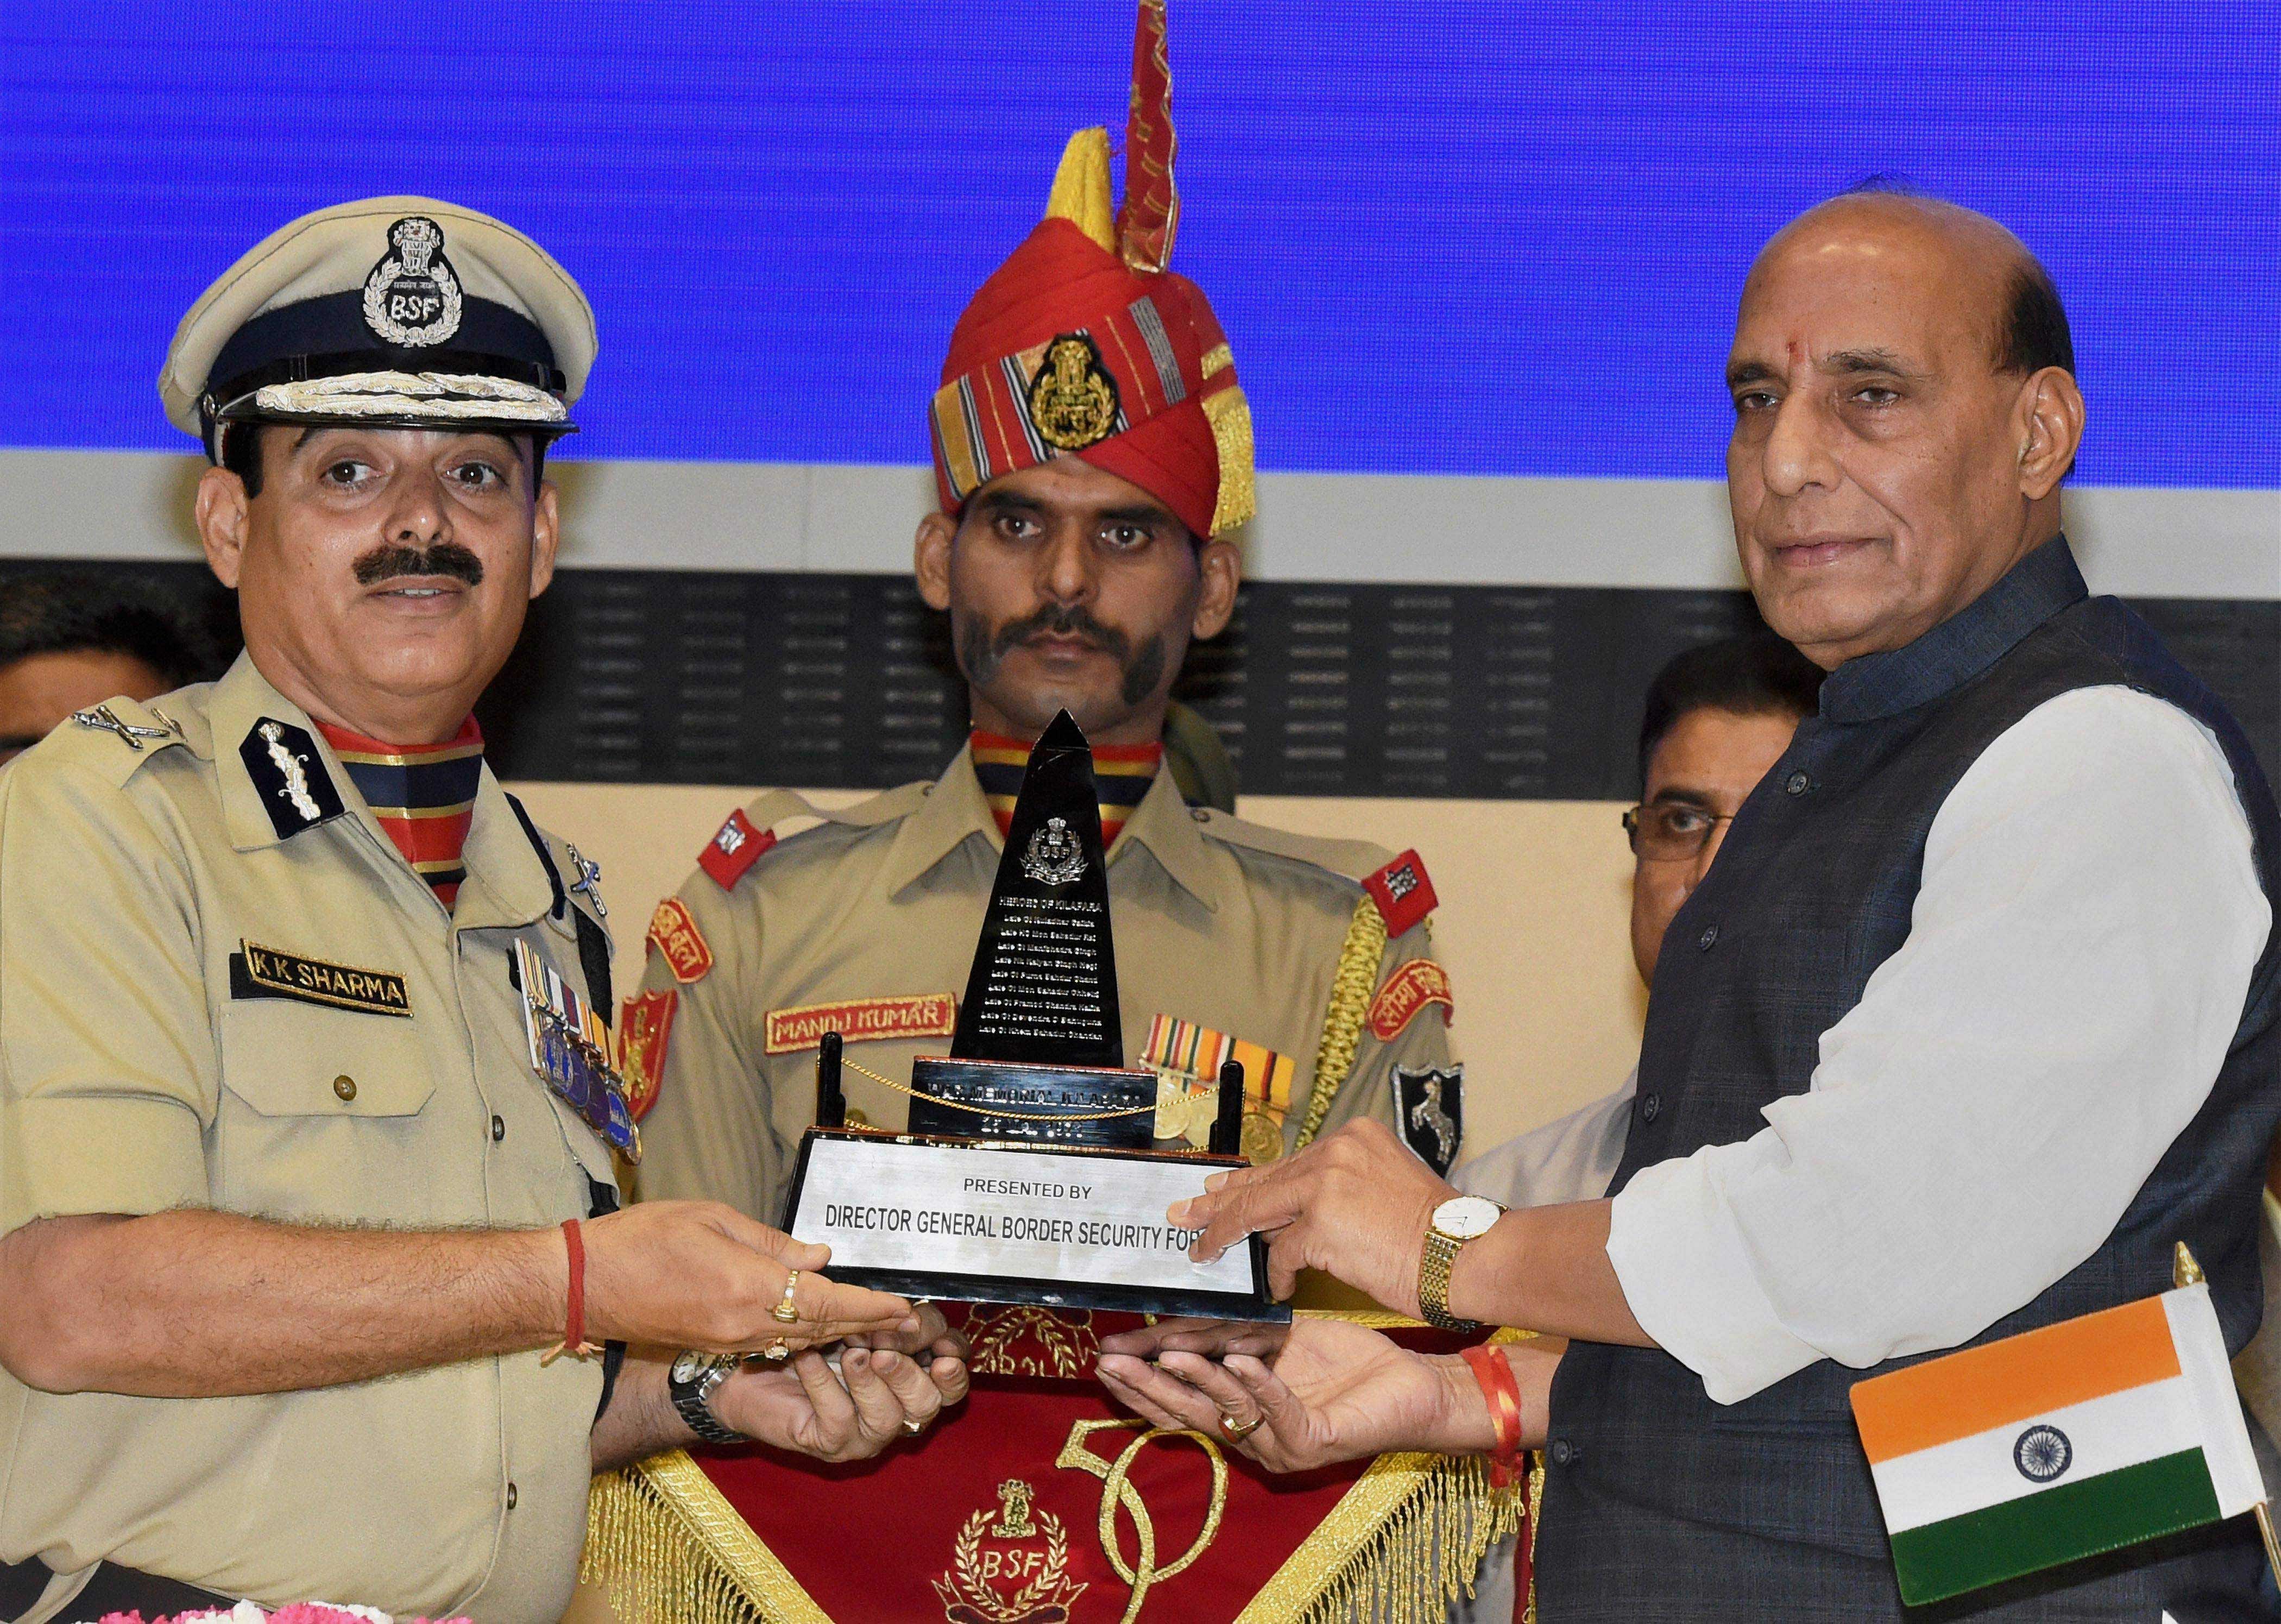 New Delhi: Union Home Minister Rajnath Singh being received a memento from Director General of Border Security Force (BSF) K K Sharma at the 15th BSF investiture ceremony in New Delhi on Thursday.PTI  photo.